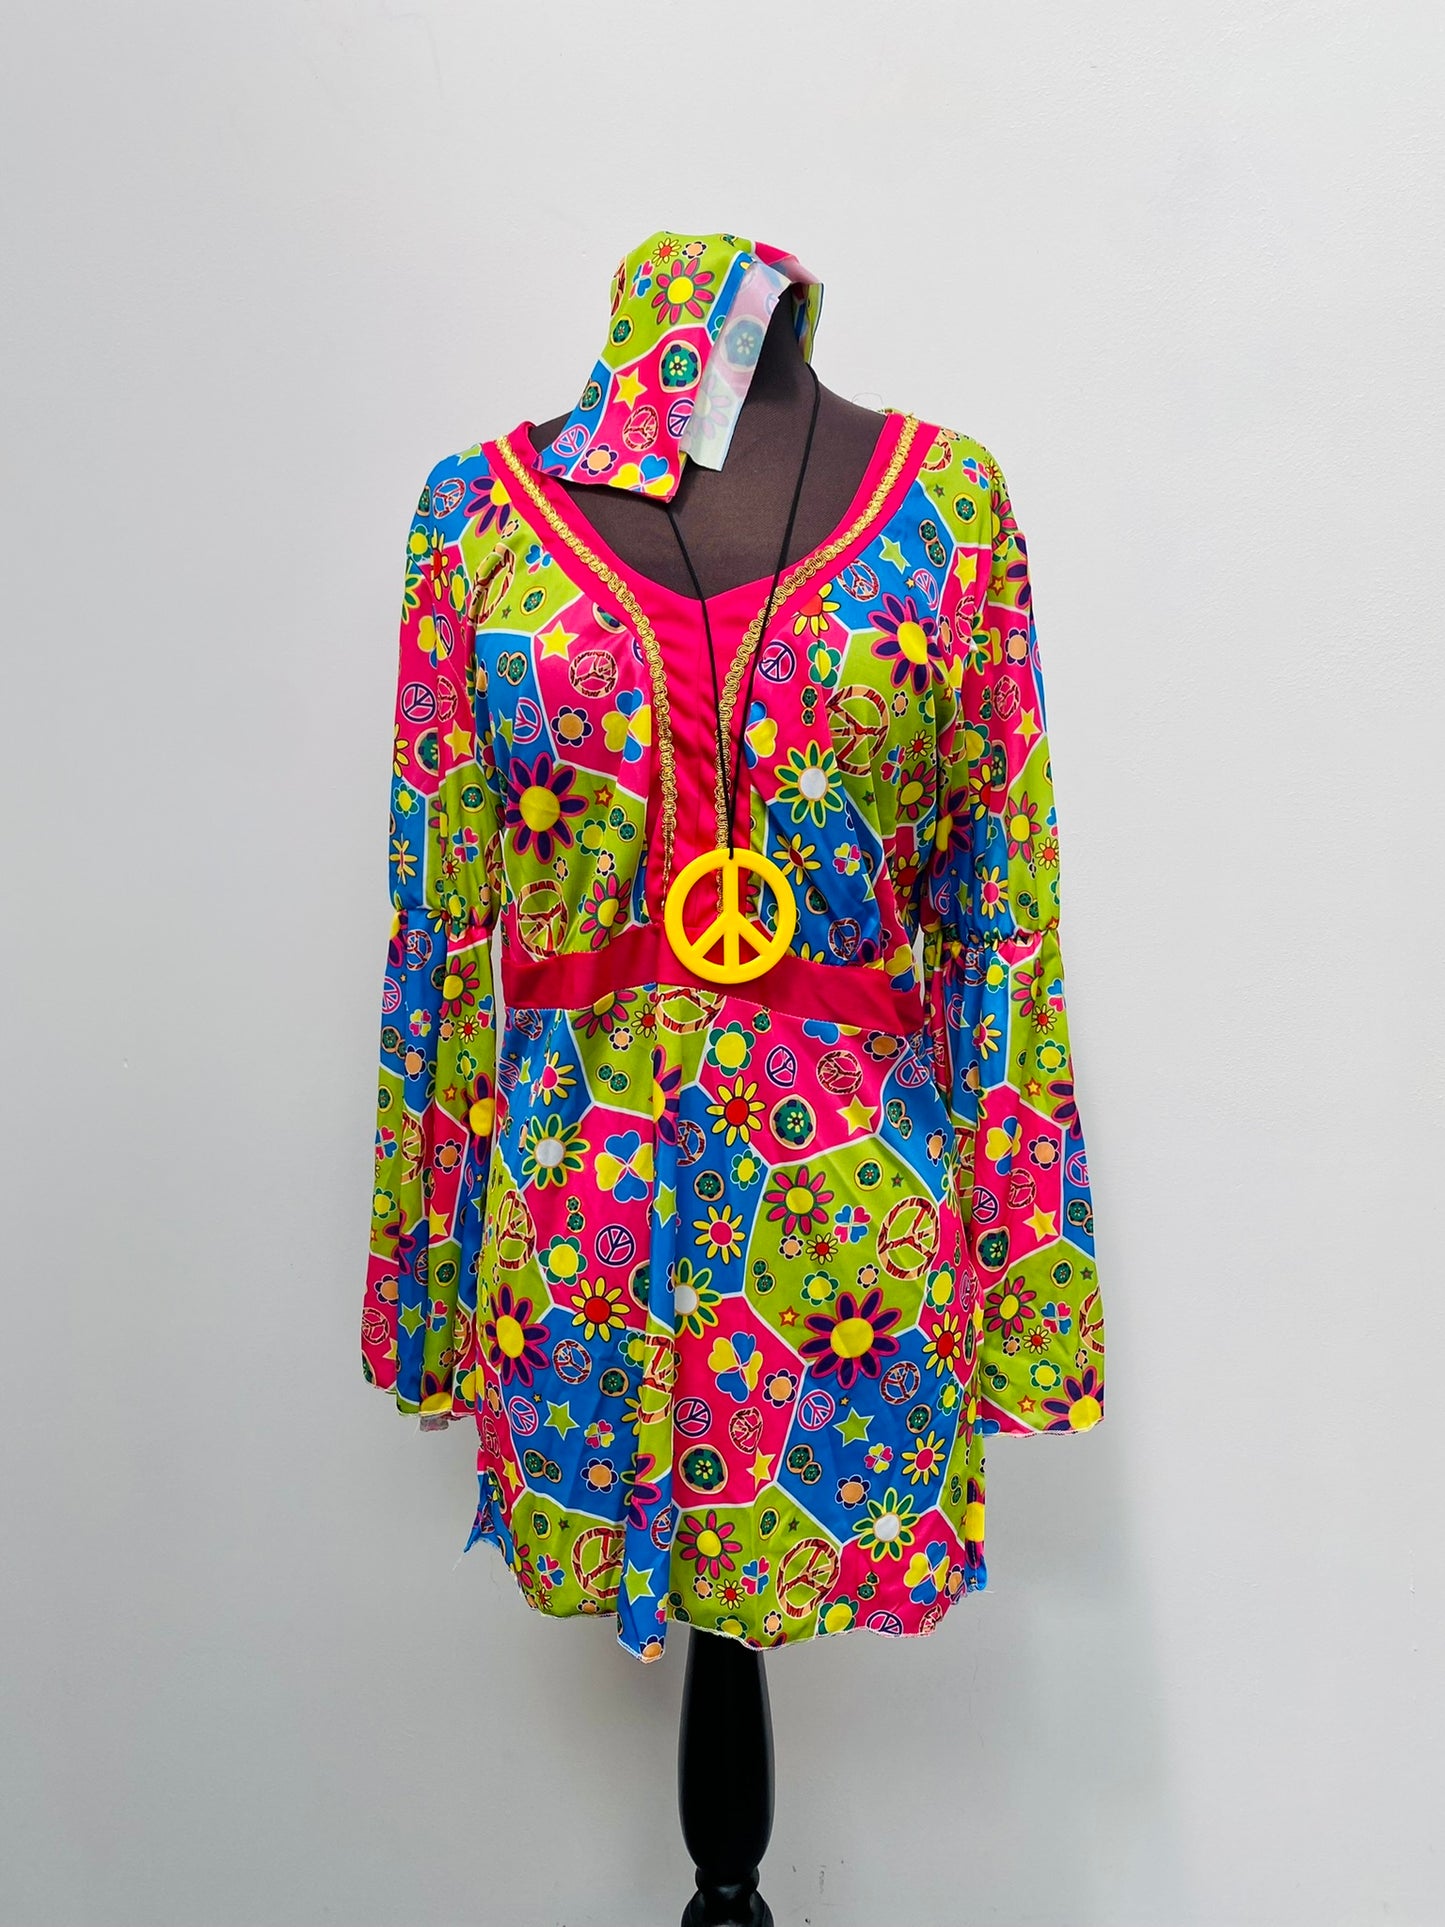 60s-70s style Groovy Chick Hippie Outfit Size large 18-20 - Ex Hire Fancy Dress Costume